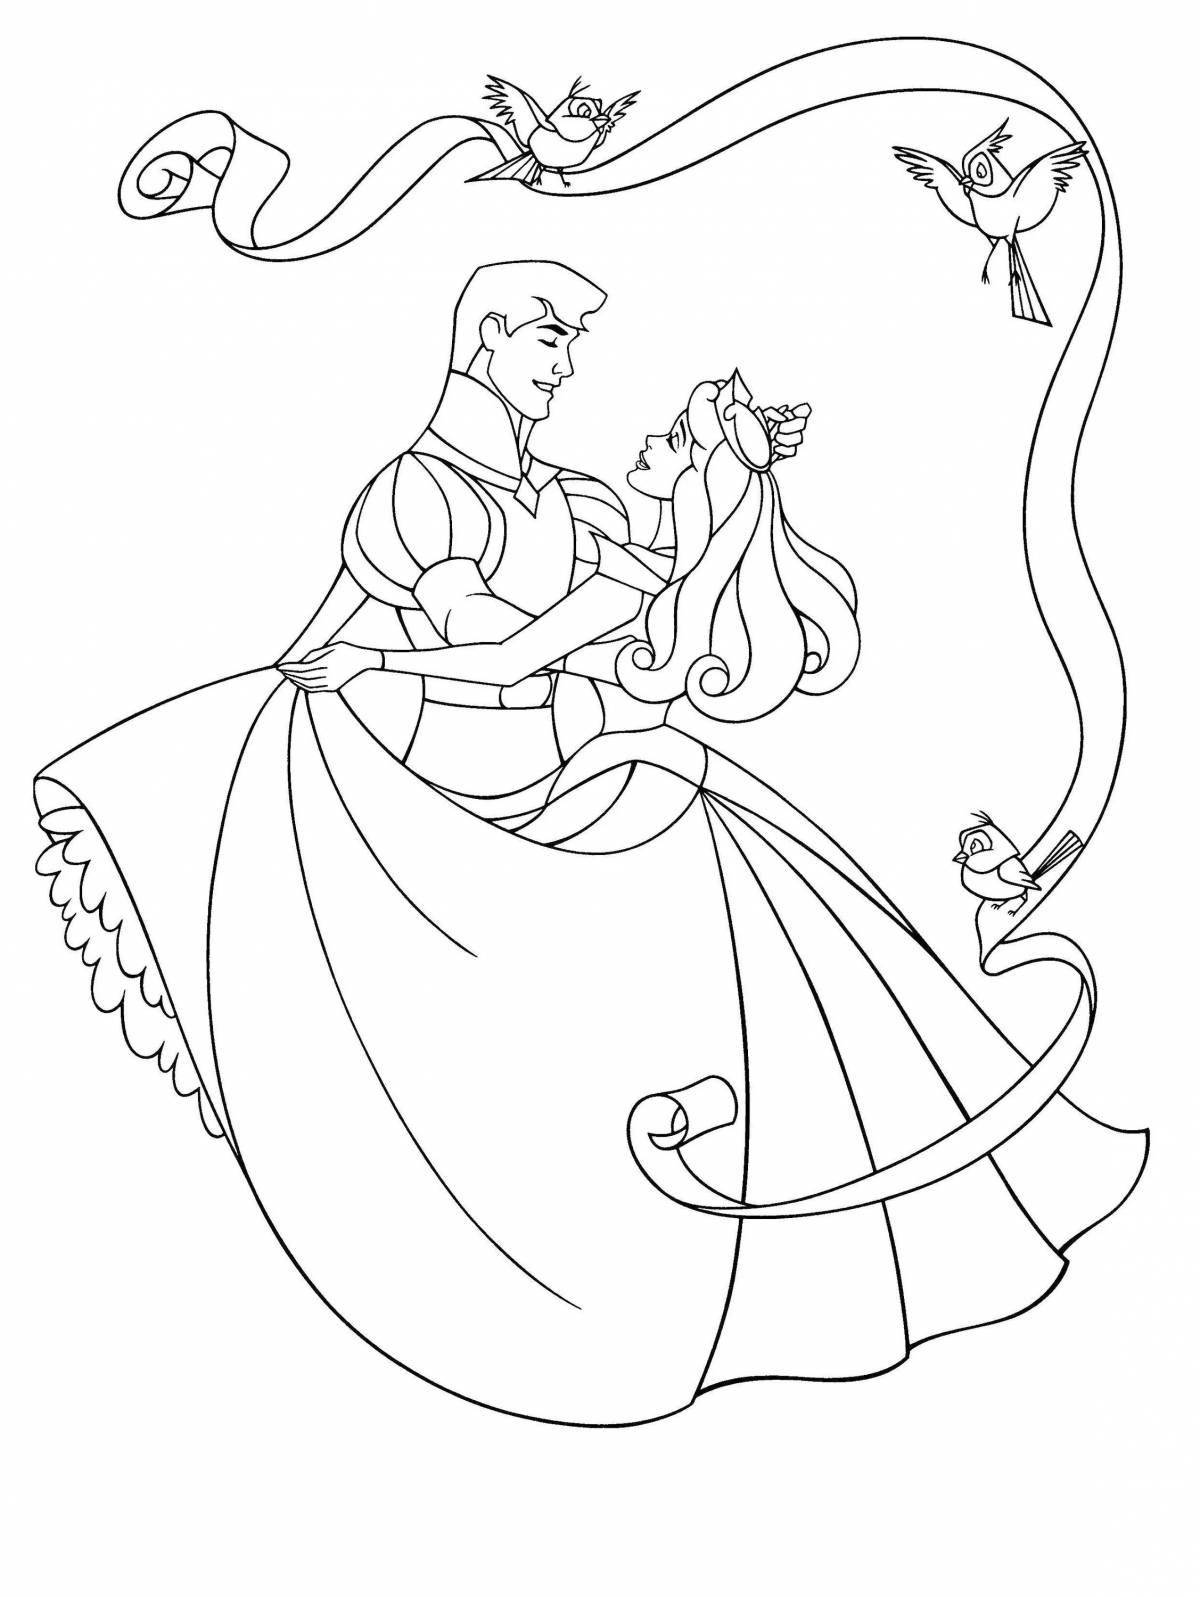 Fairytale coloring book sleeping beauty for kids